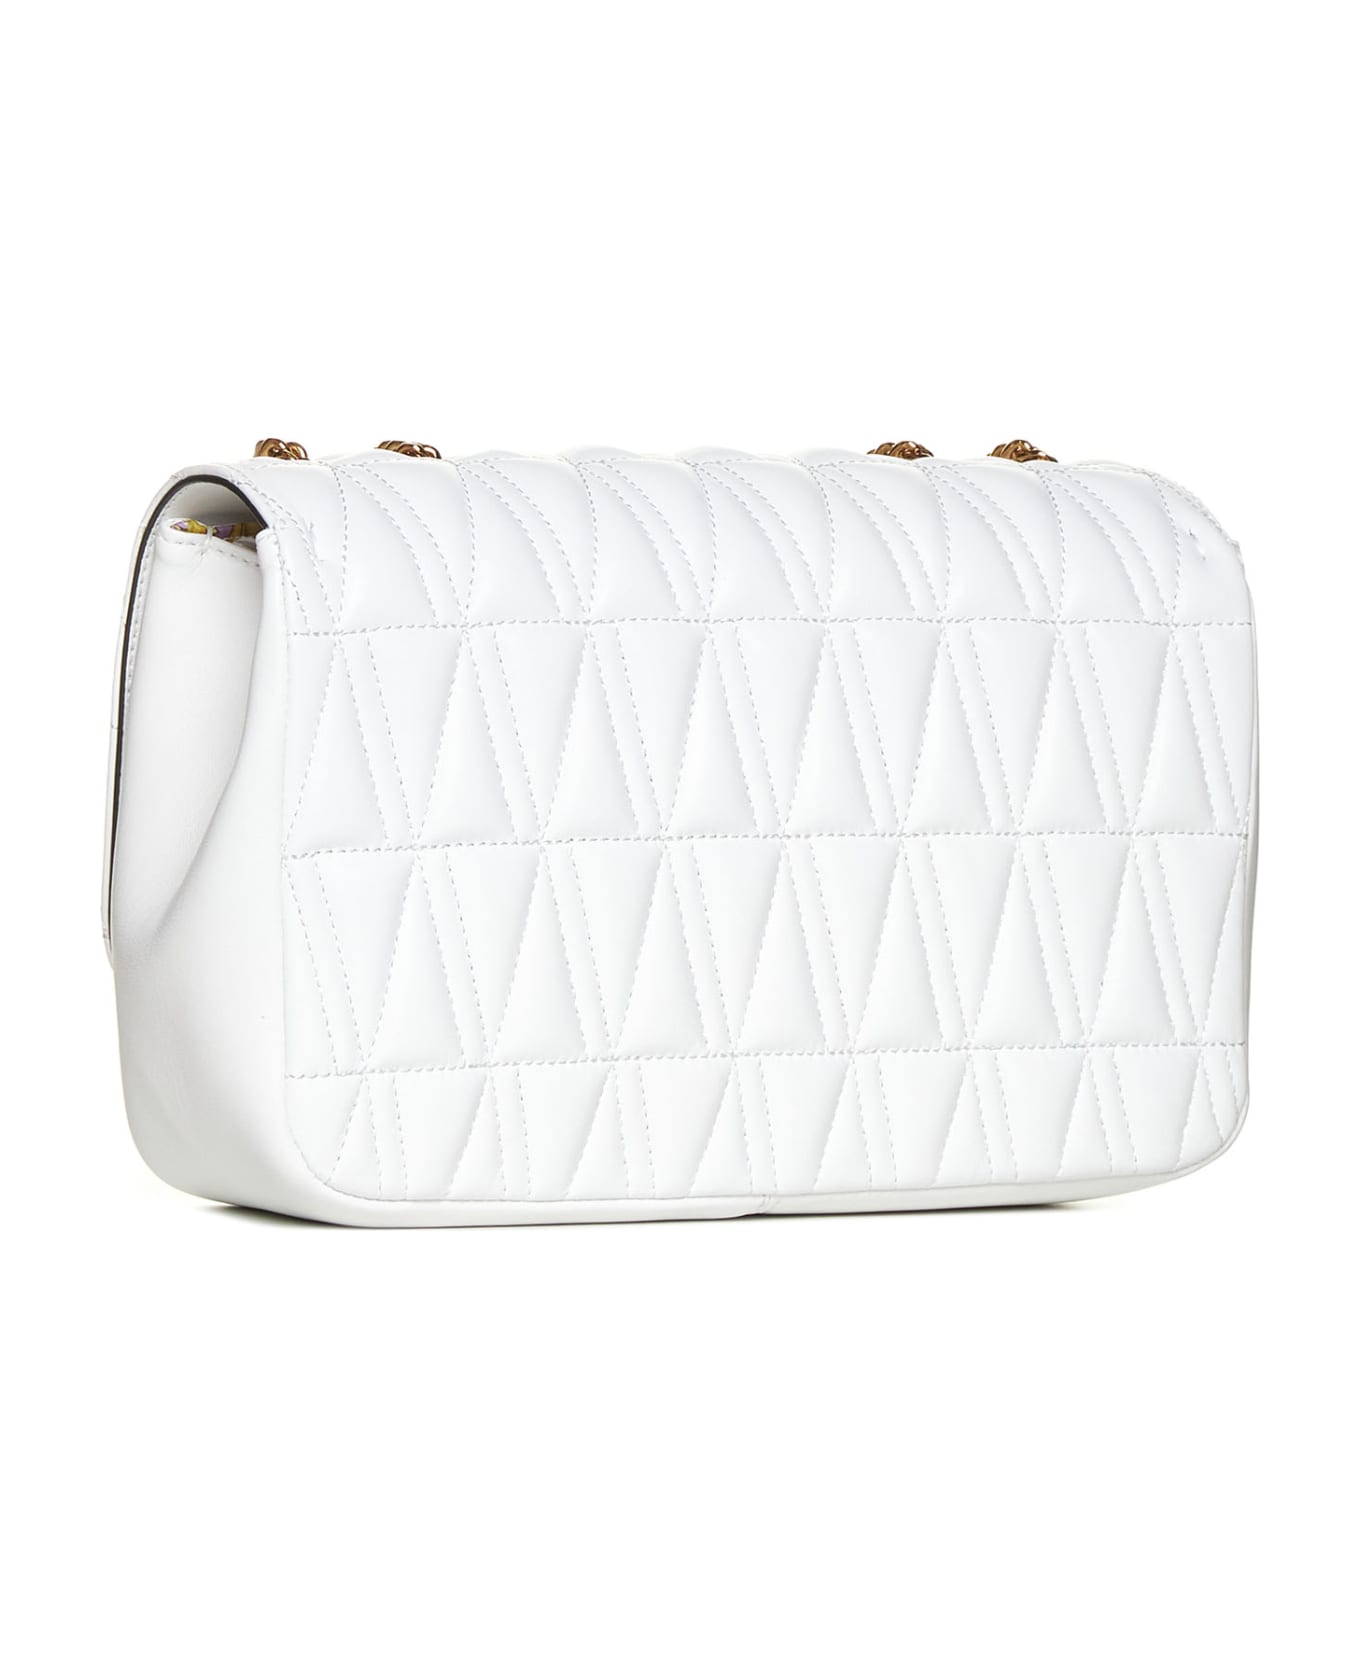 Versace Quilted Nappa Crossbody Bag - White